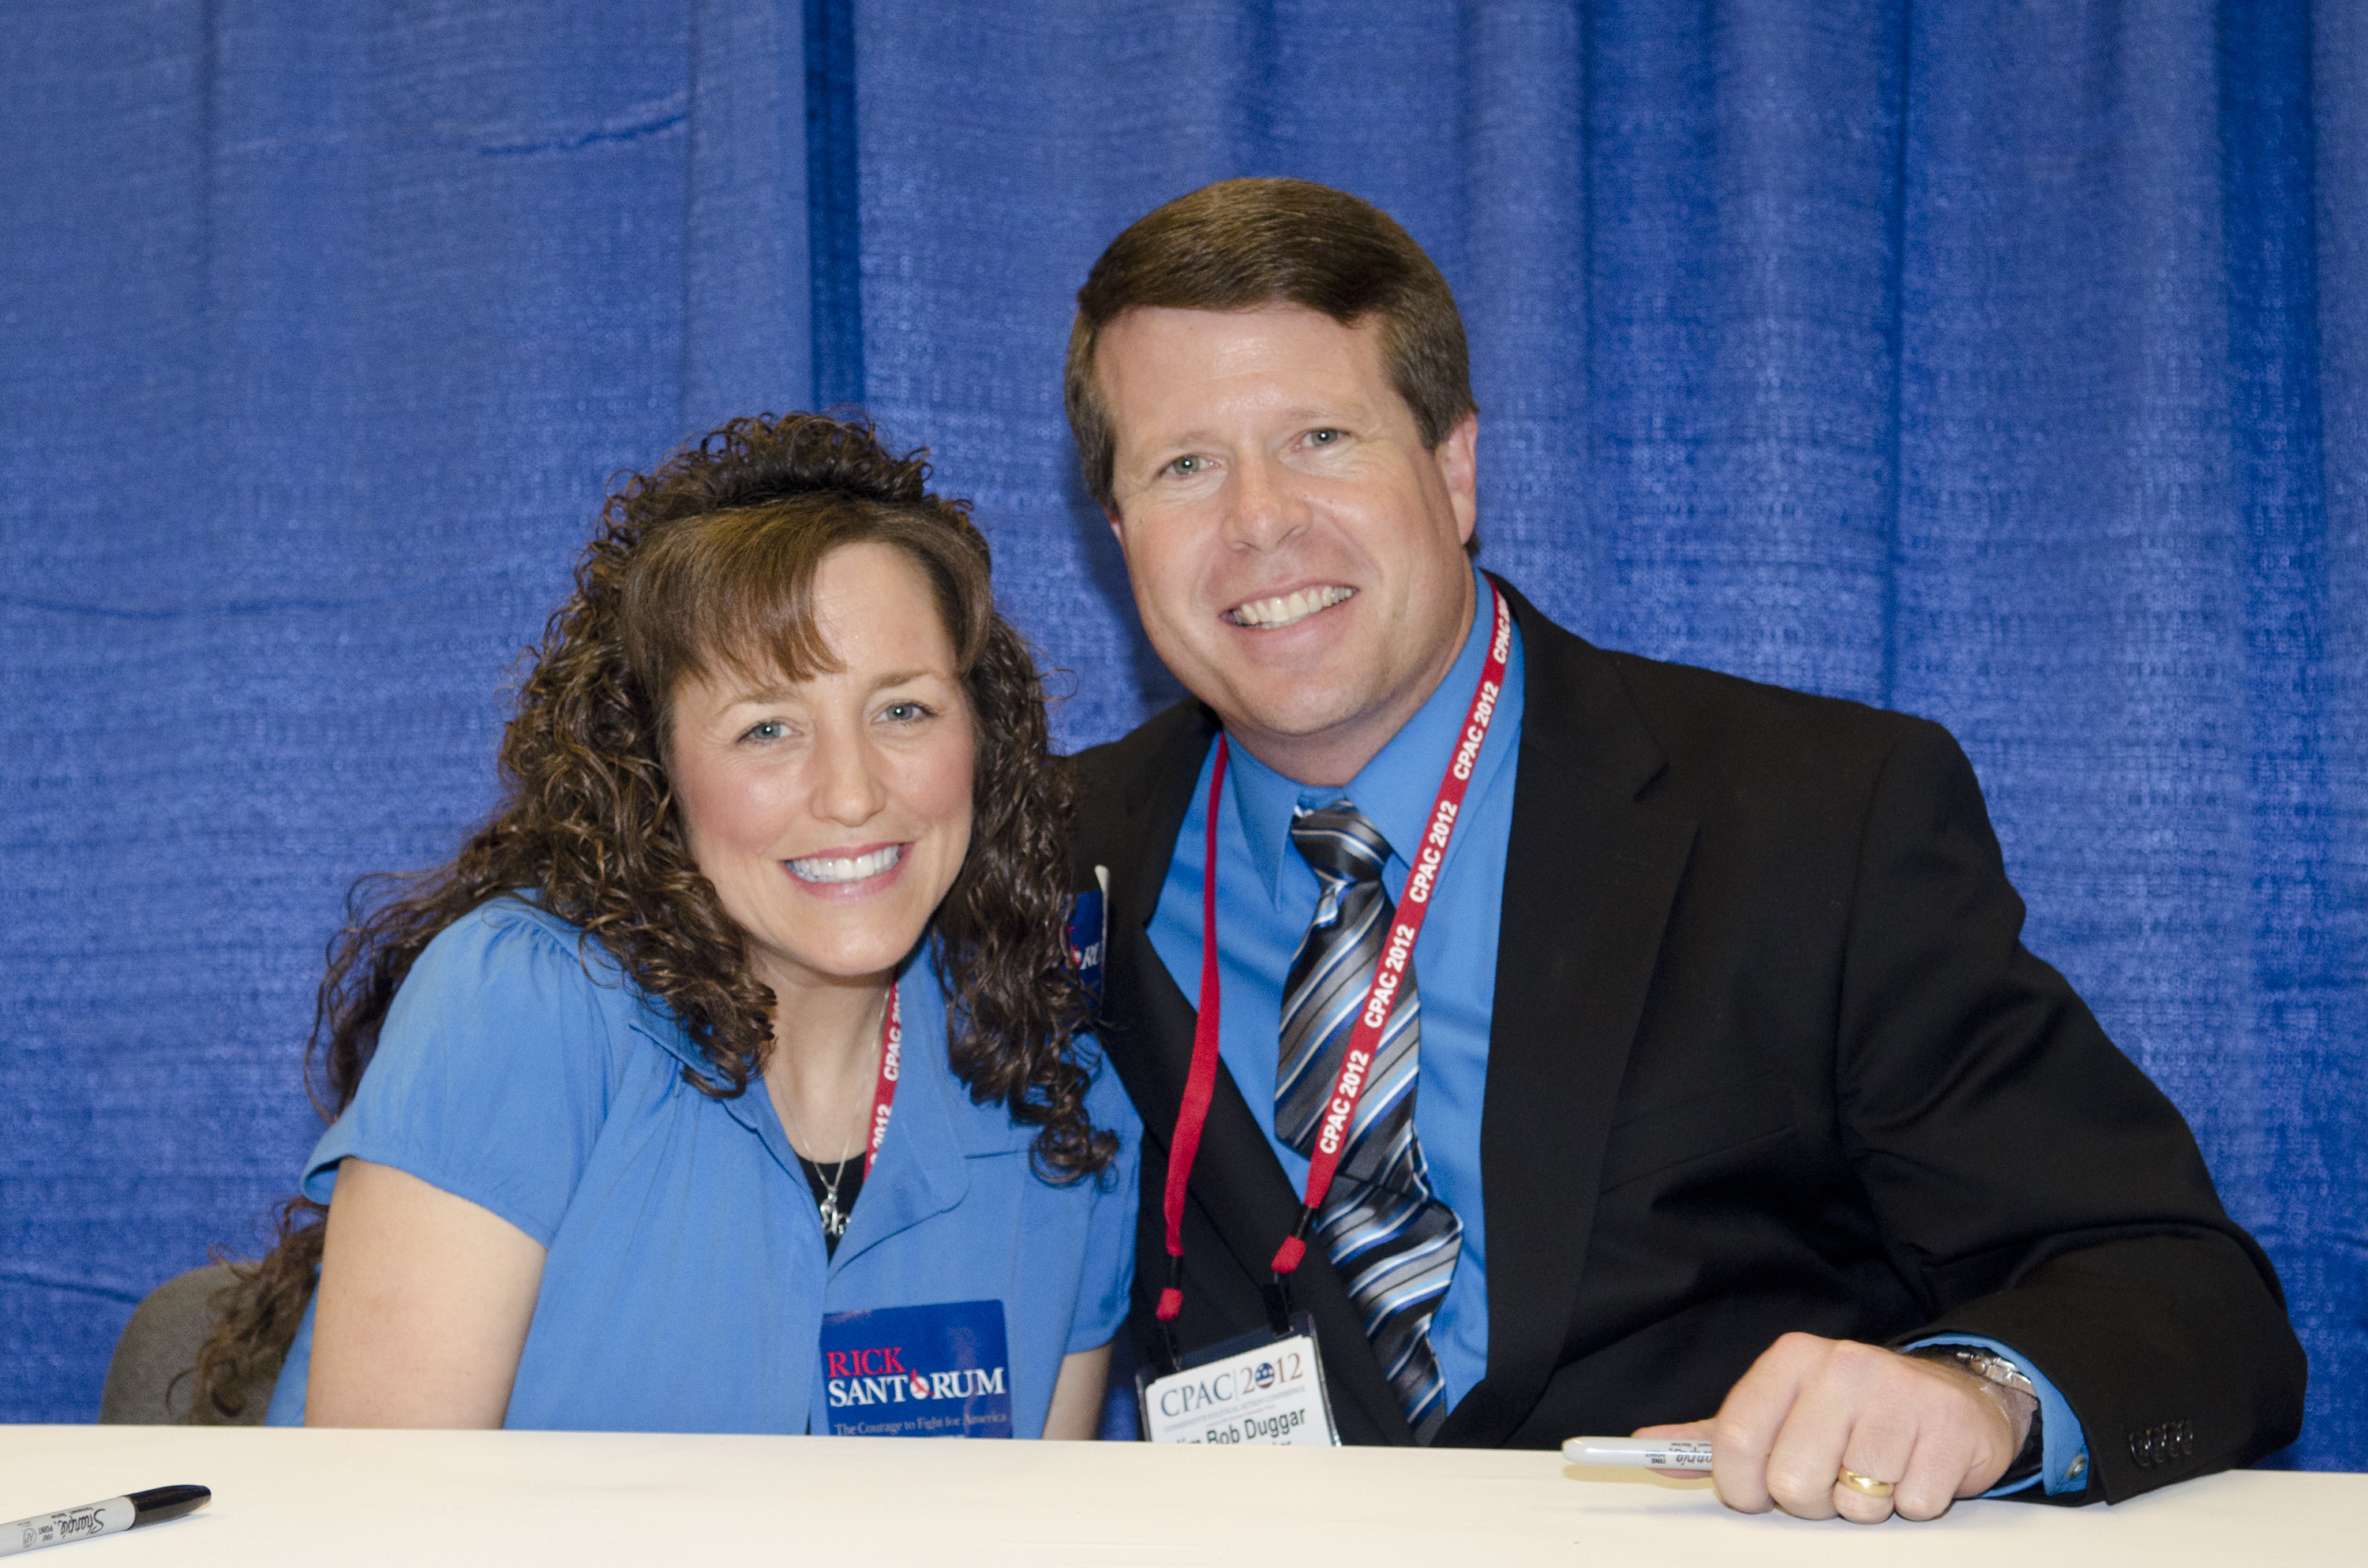 Michelle and Jim Bob Duggar smiling for the cameras an event in 2012